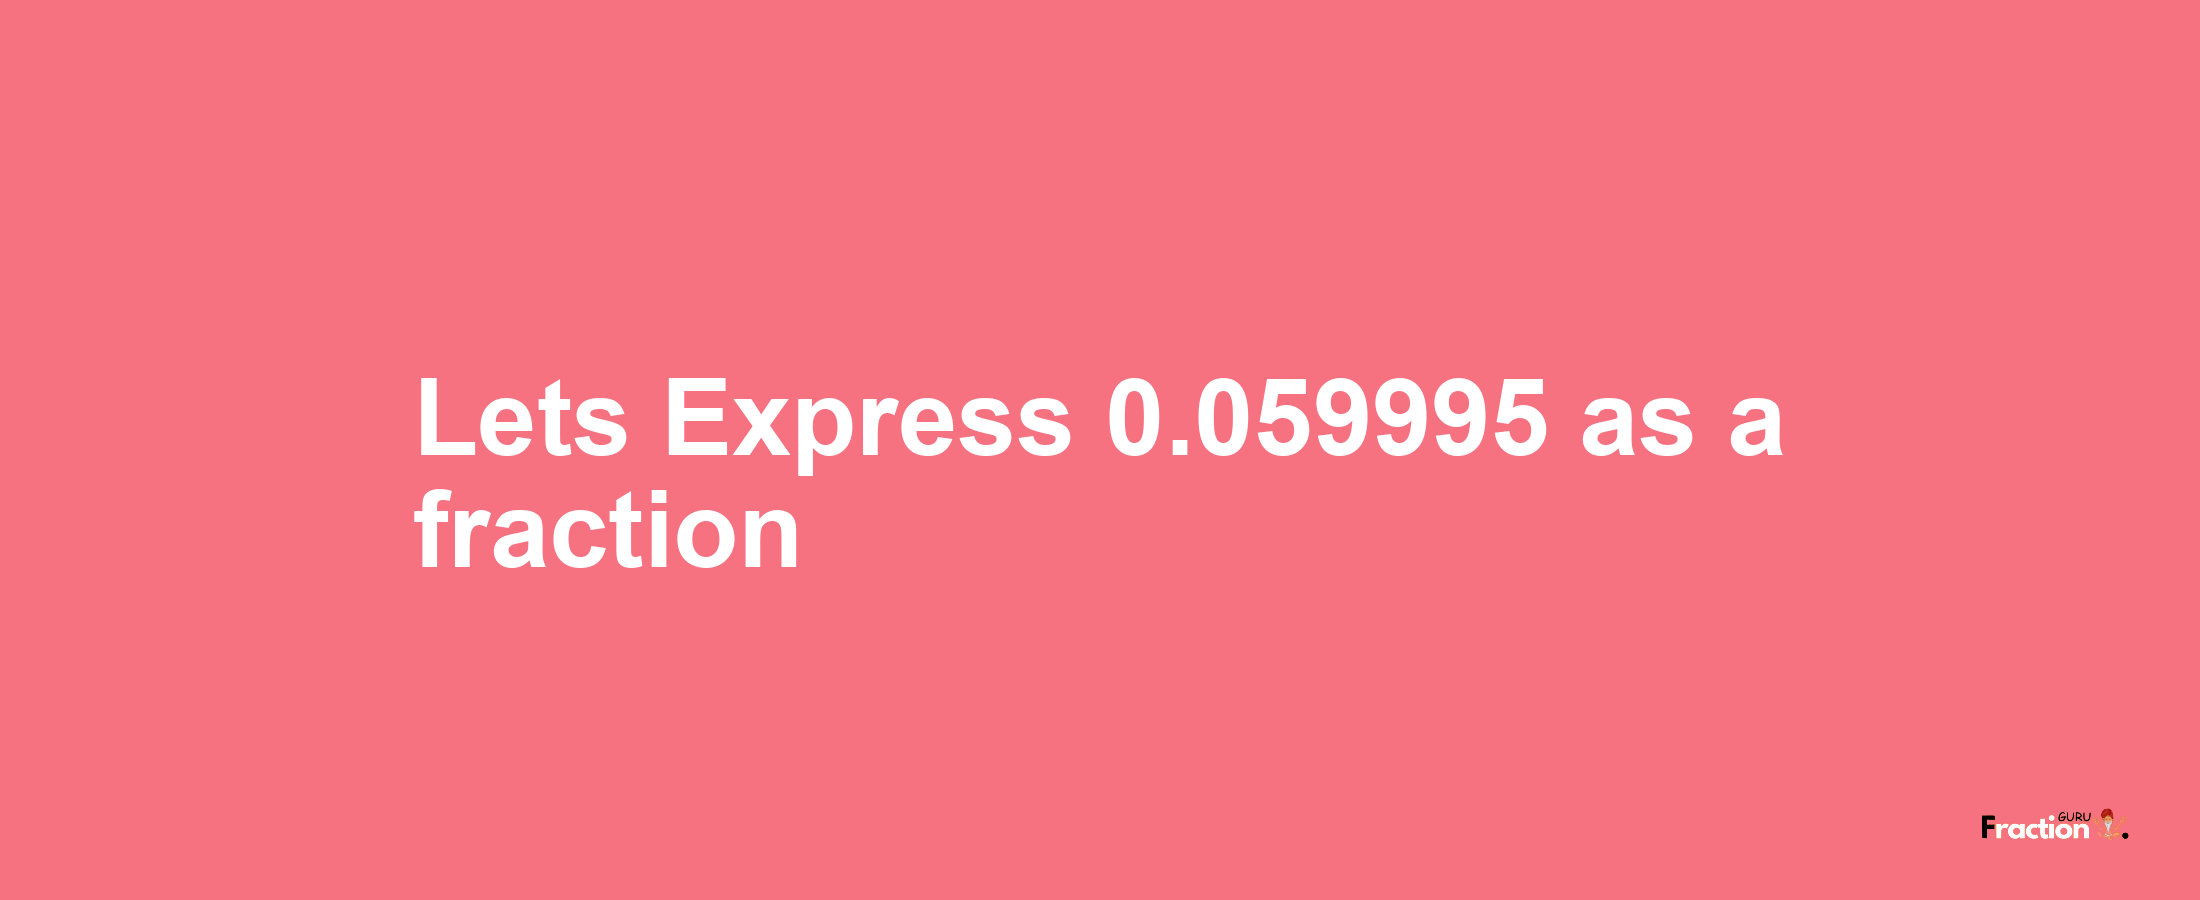 Lets Express 0.059995 as afraction